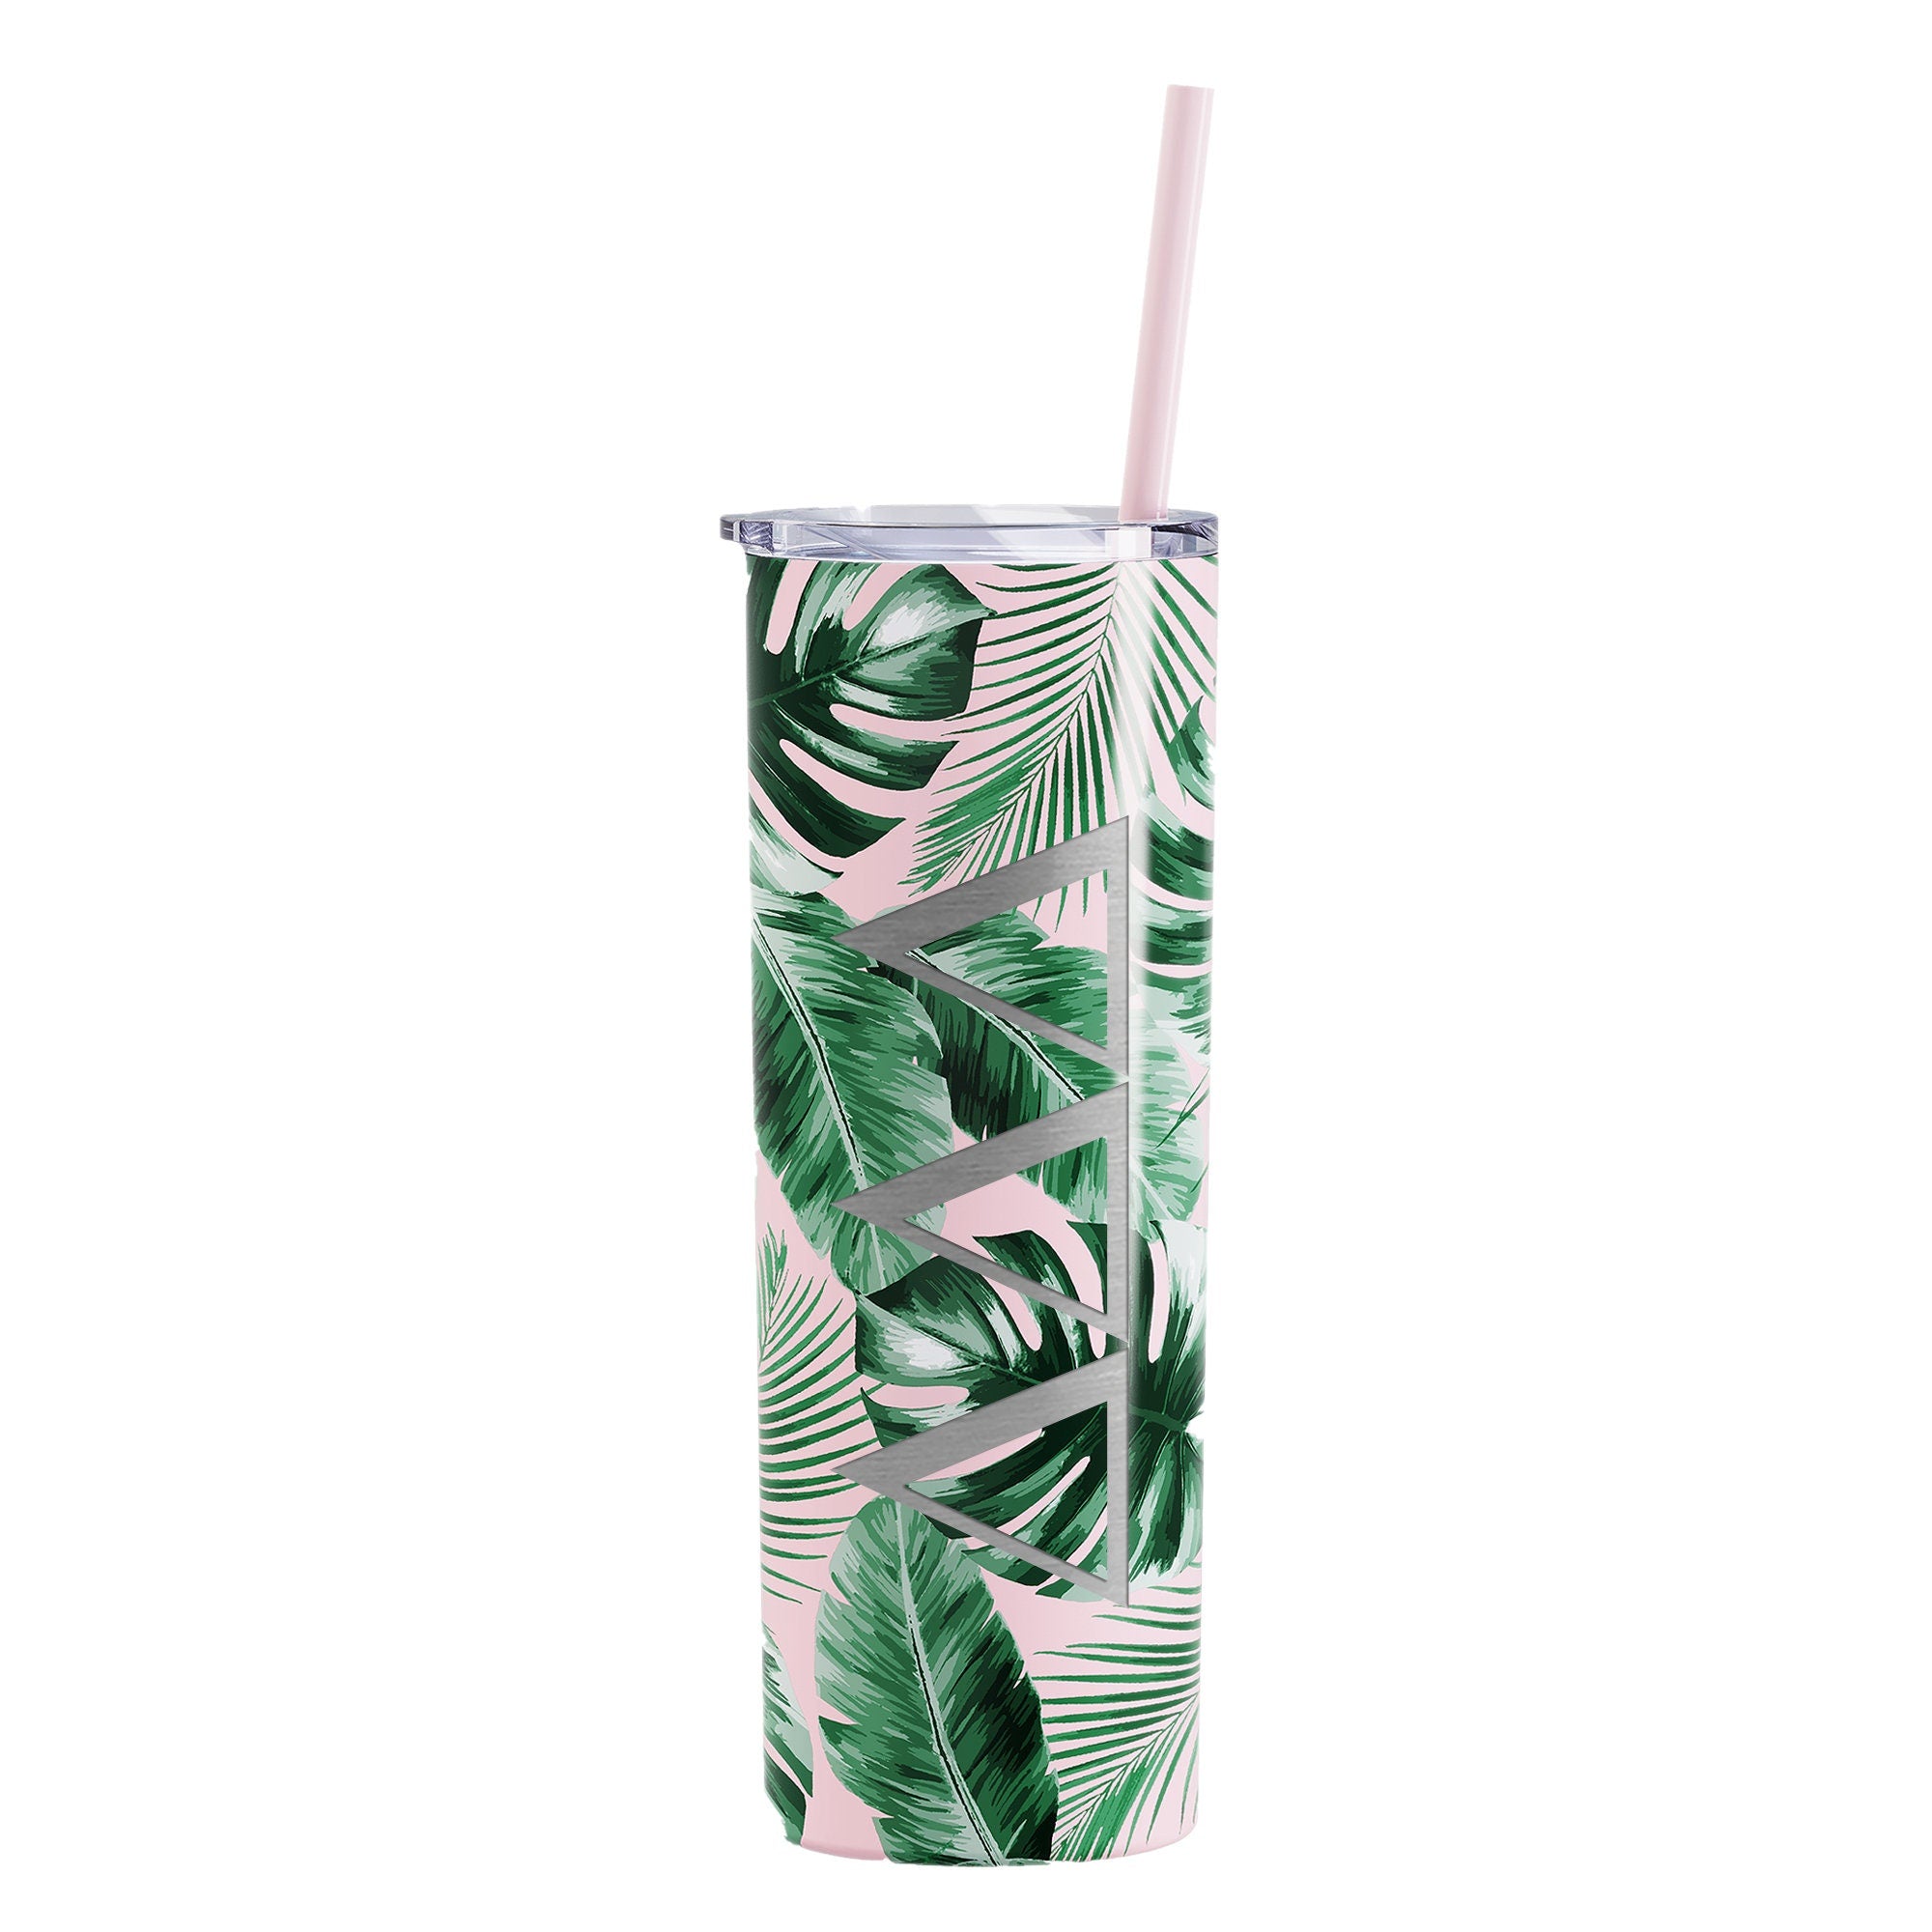 Delta Delta Delta - Tropical Printed Skinny Tumbler with Straw - Laser Engraved - Go Greek Chic